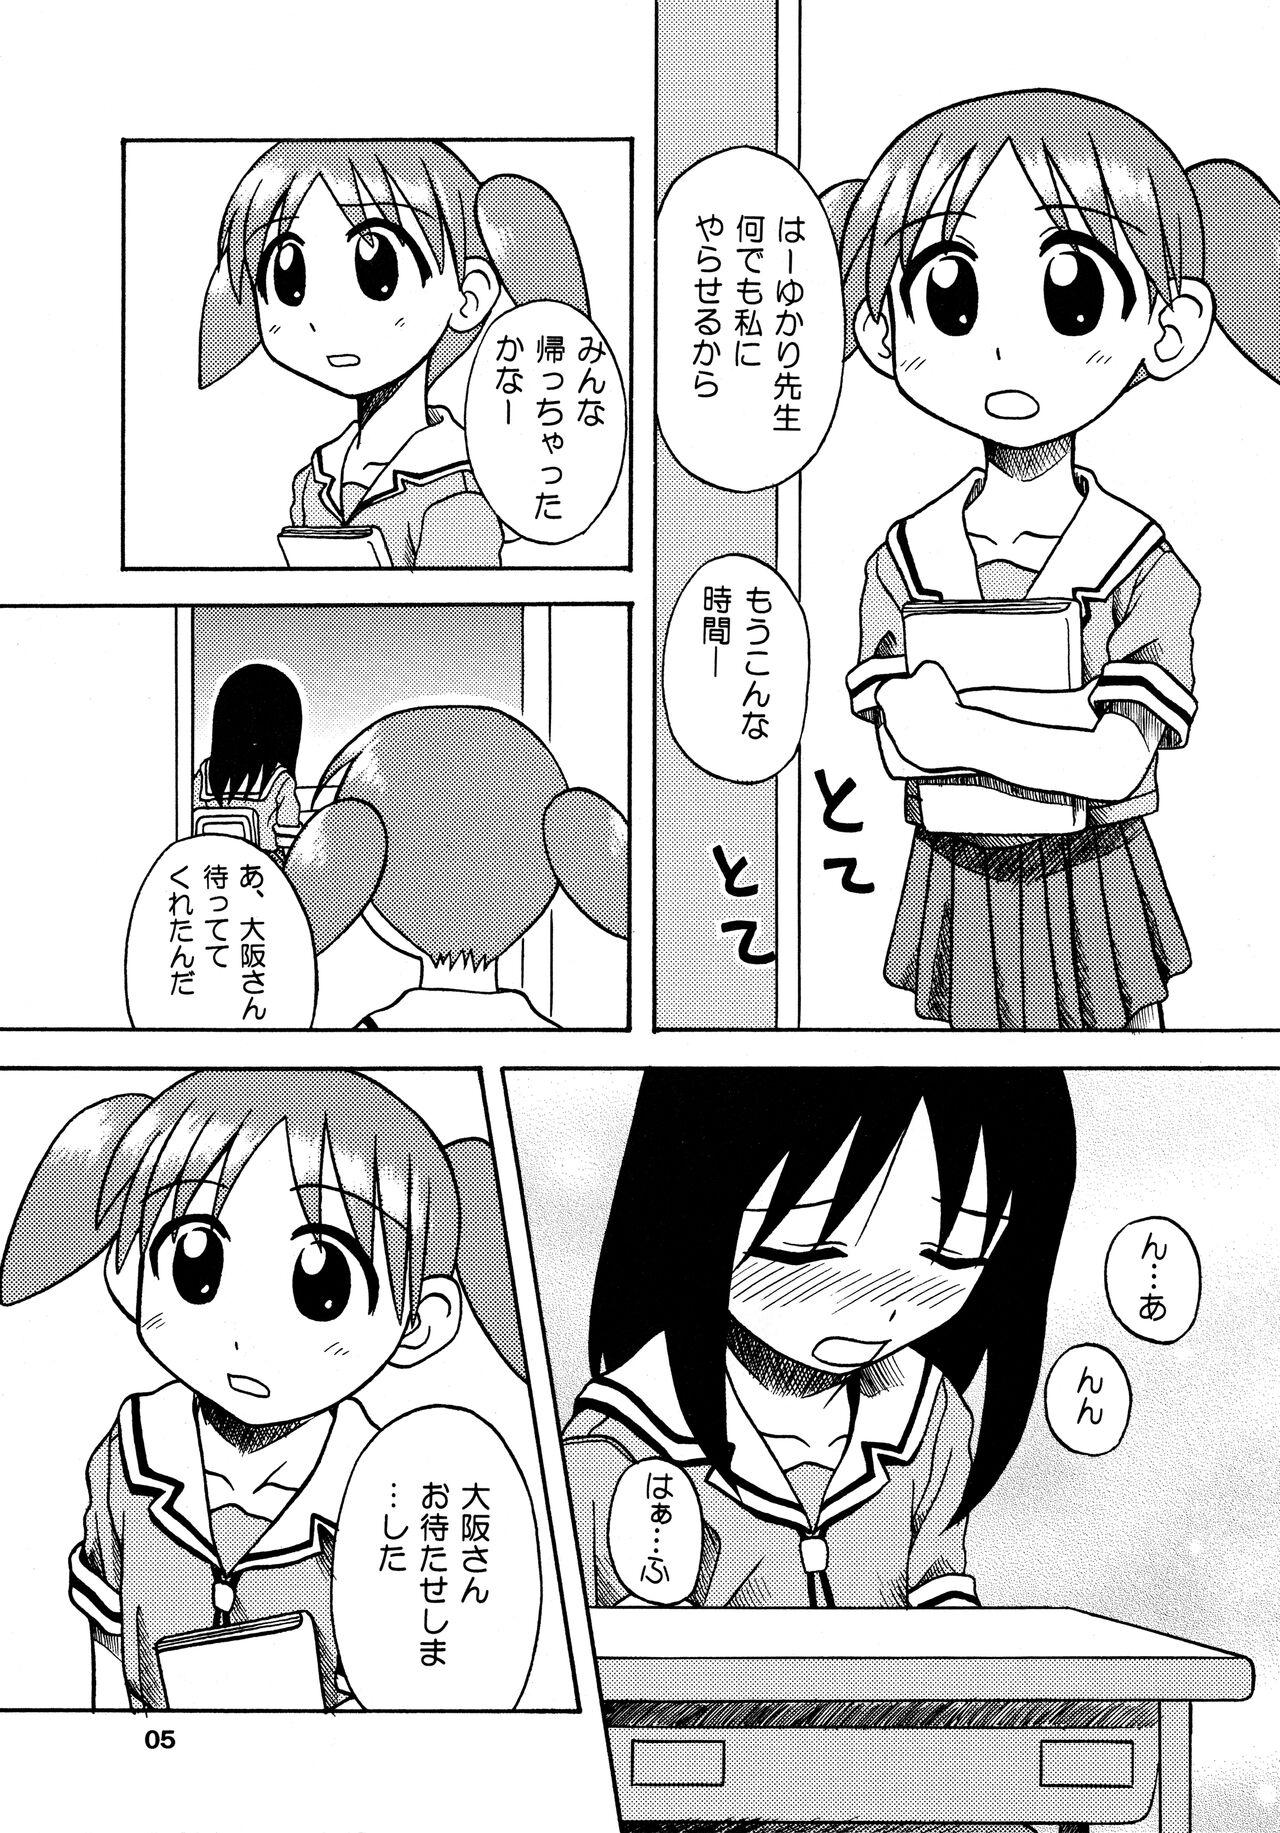 Naked ANOTHER LIFE - Azumanga daioh Perfect Body Porn - Page 5